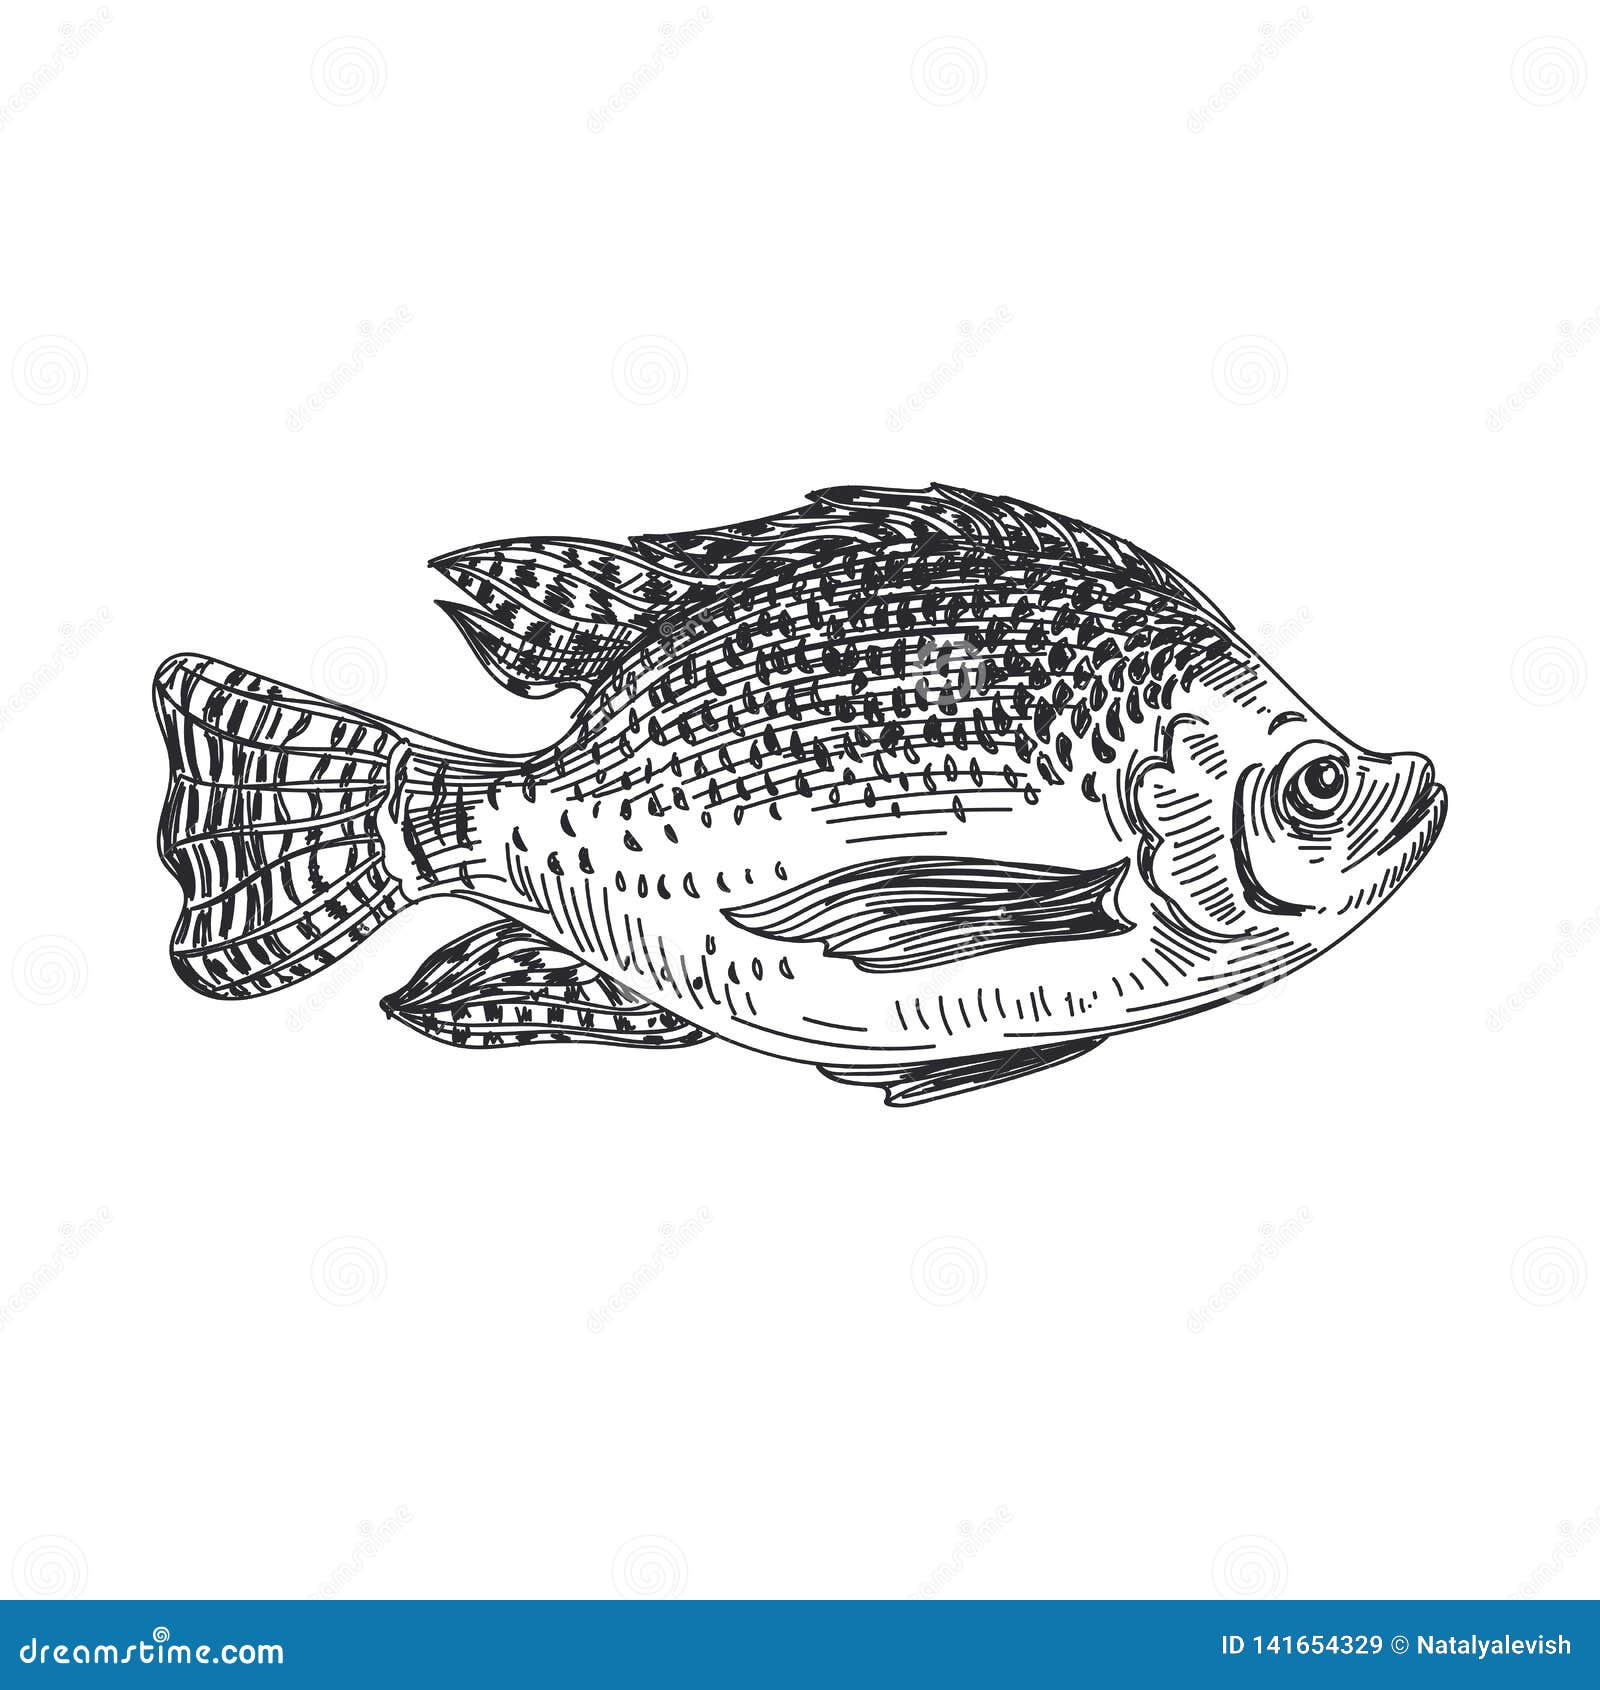 How to Draw a Cute Tilapia